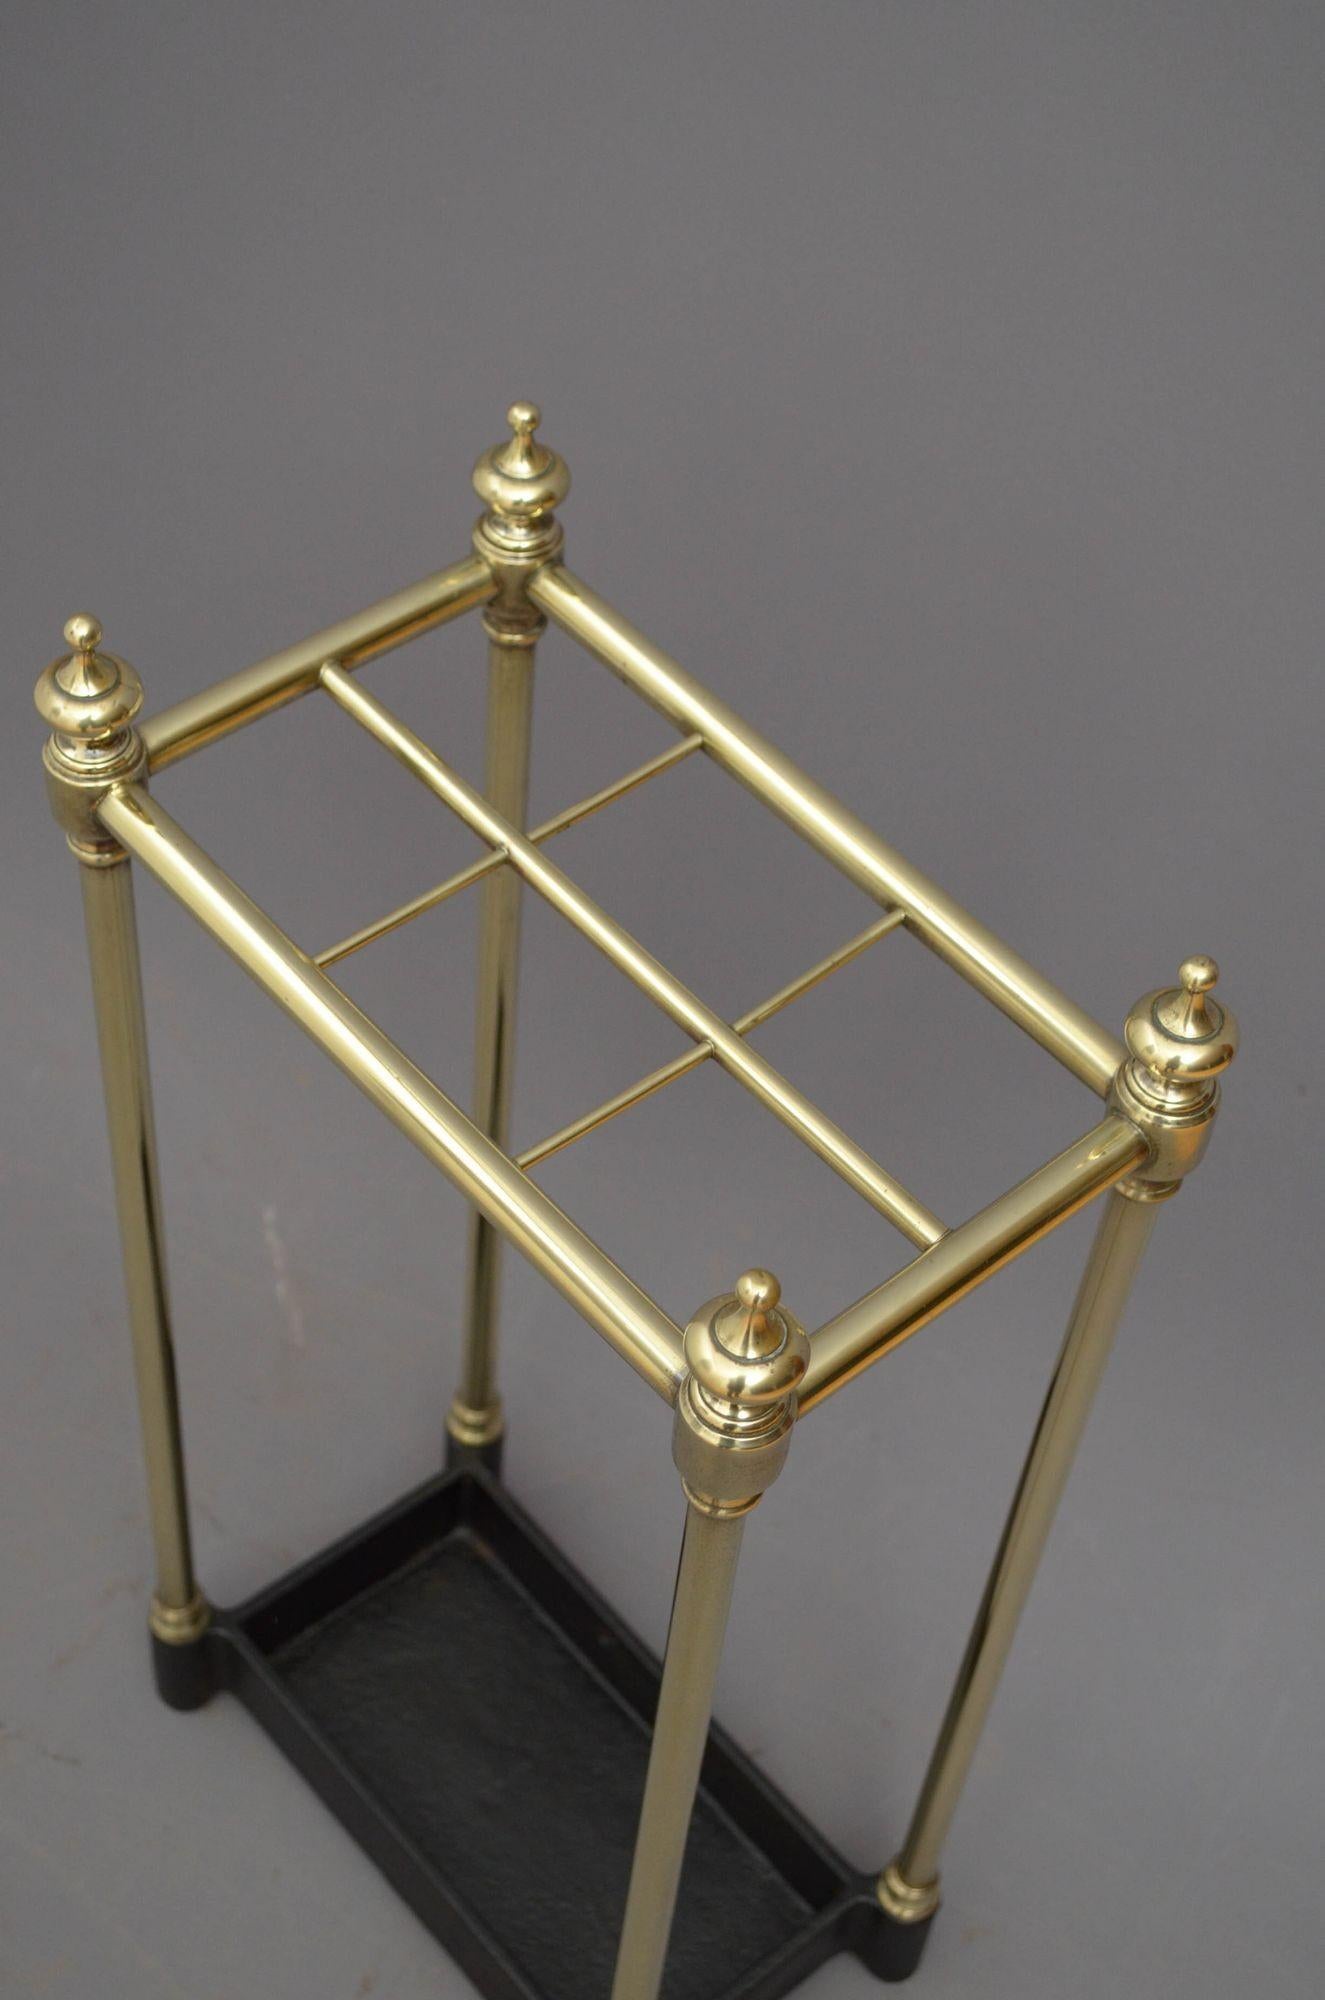 Sn5323 Victorian brass umbrella stand with six divisions, four decorative finials and cast iron drip tray, cleaned and polished ready to place at home. c1880
H24.5